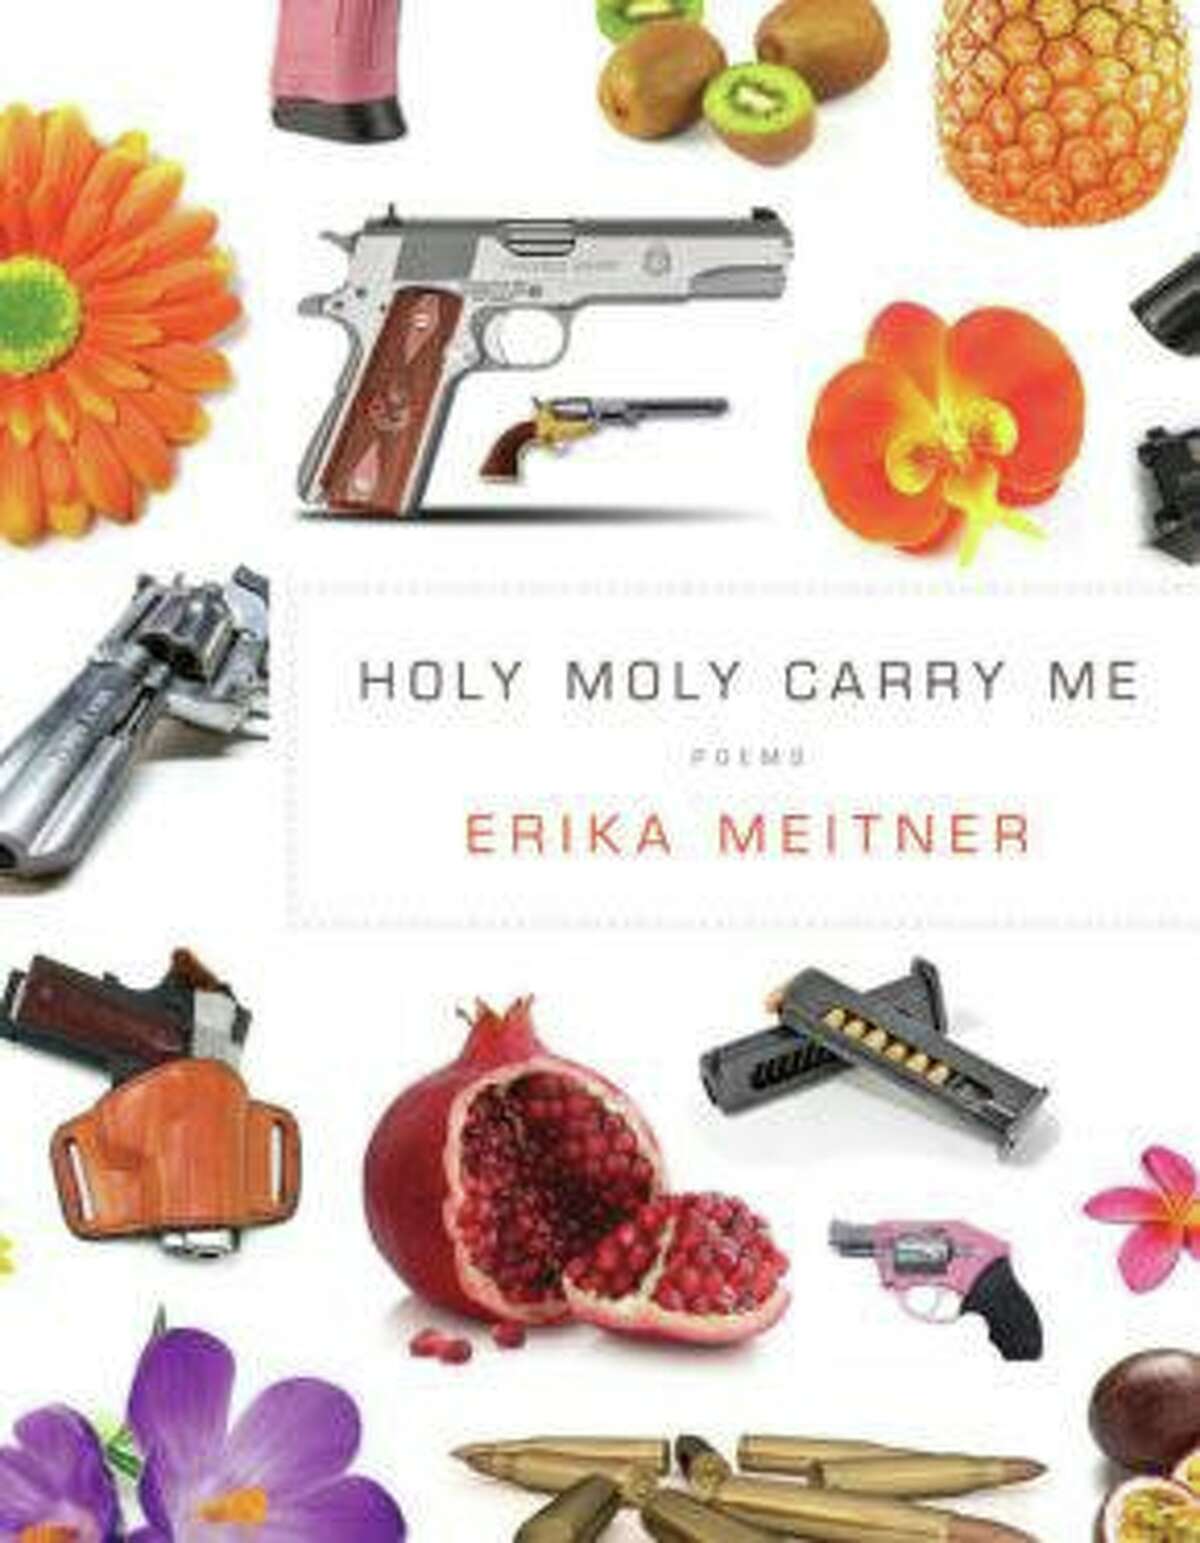 Poet Erika Meitnerbwill discuss her latest collection, “Holy Moly Carry Me,” as well as her other works in a Poet’s Voice event on Saturday at the Greenwich Library.